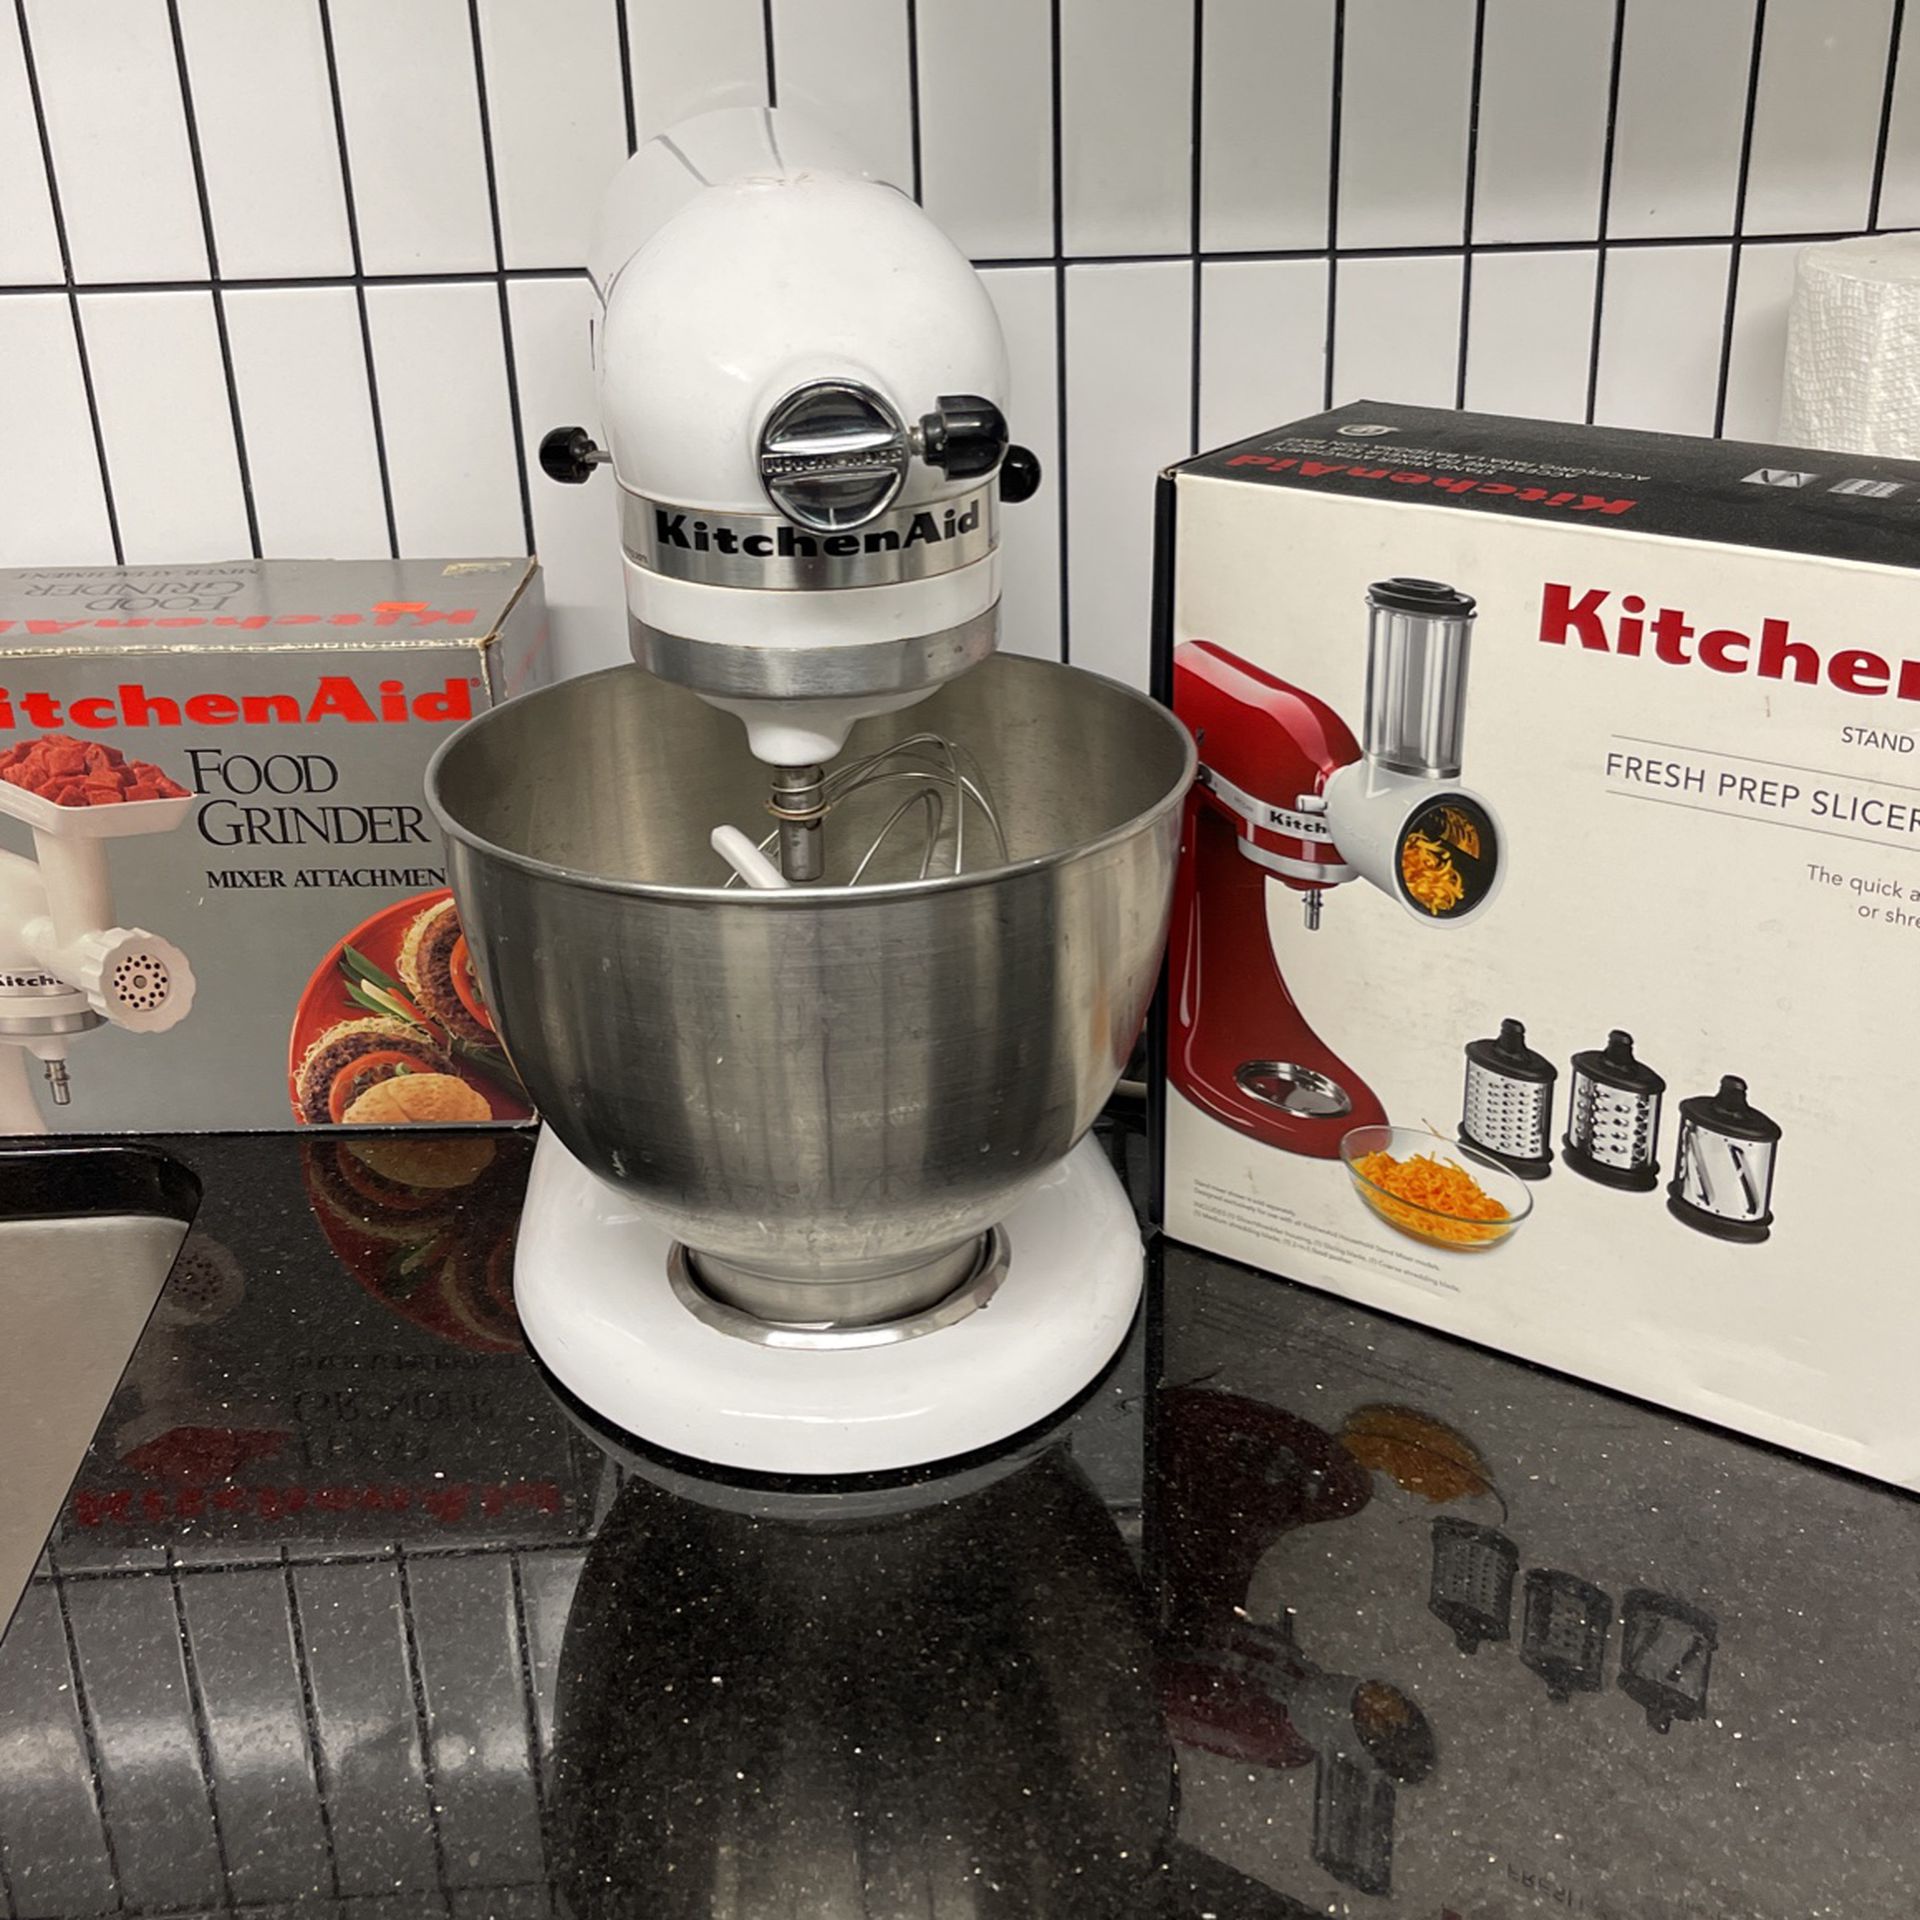 Kitchen Aid Classic Stand Mixer With Prep Slicer And Meat Grinder Attachments